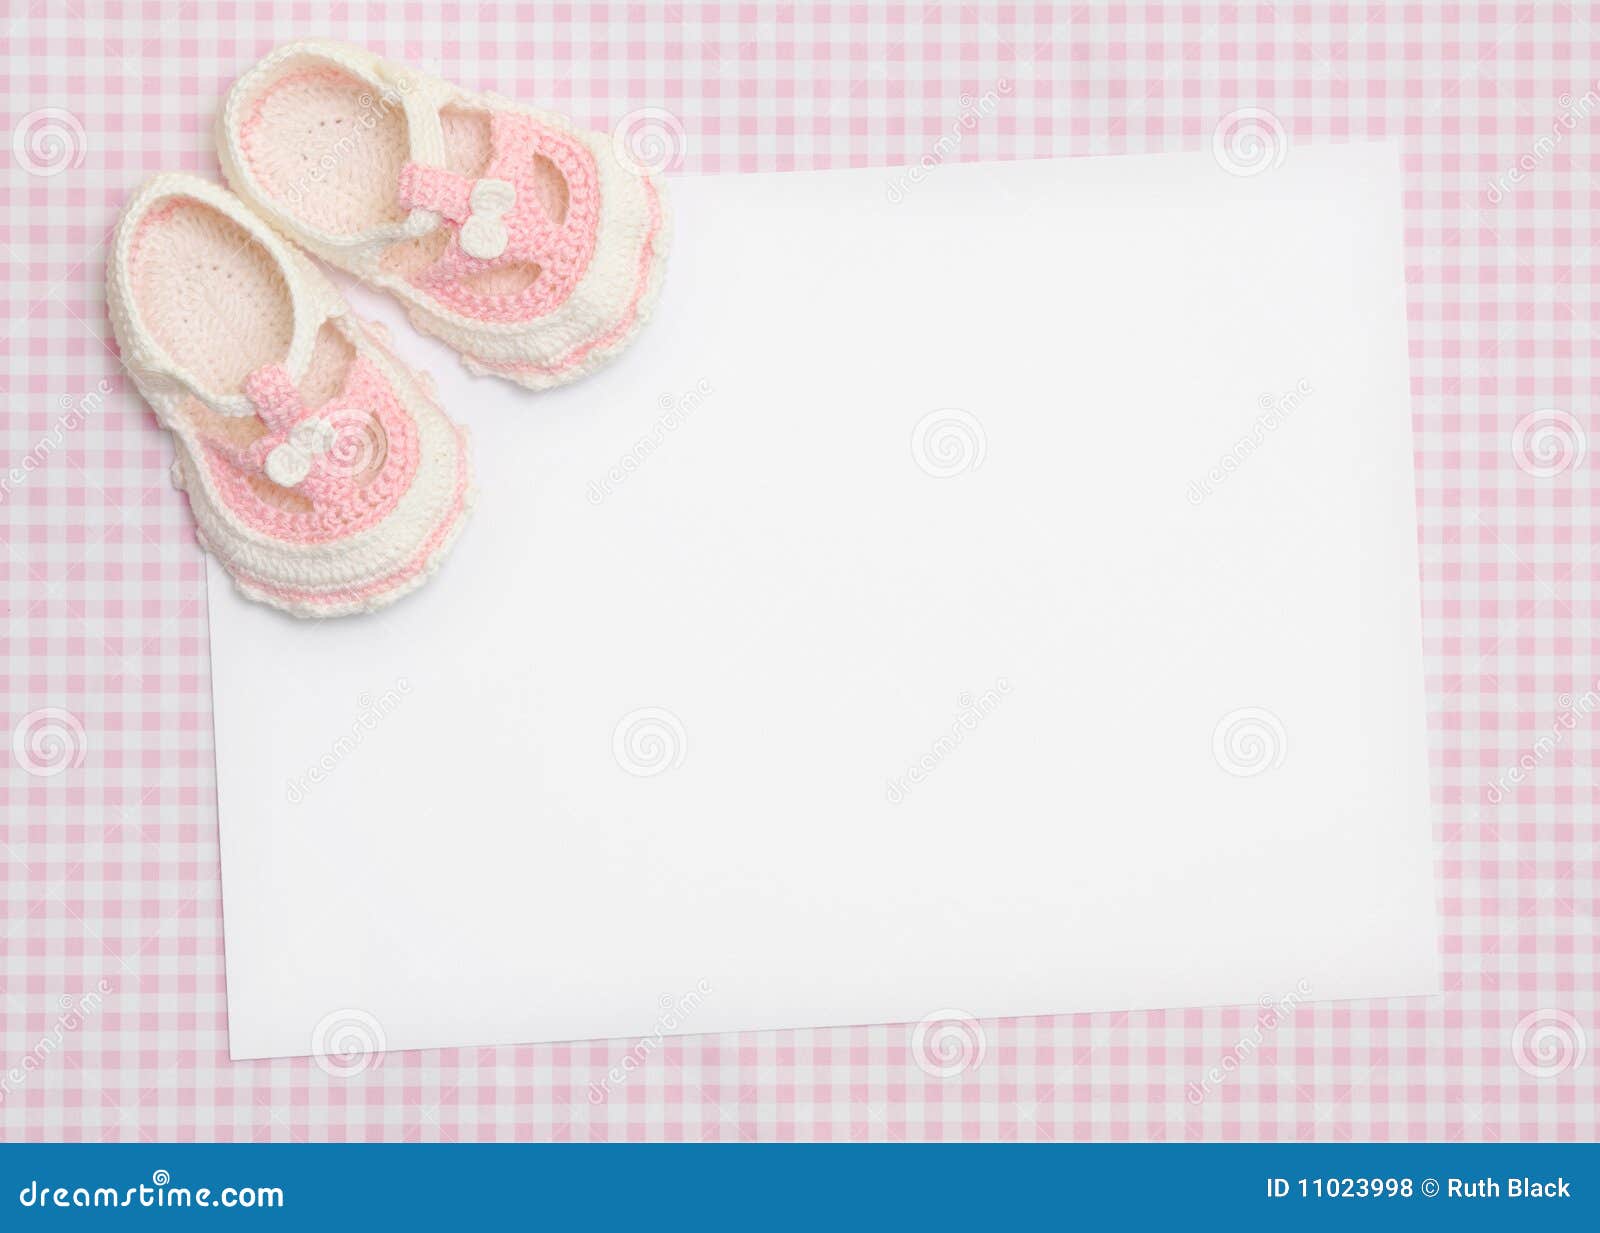 Blank card for new baby or baby shower invitation.